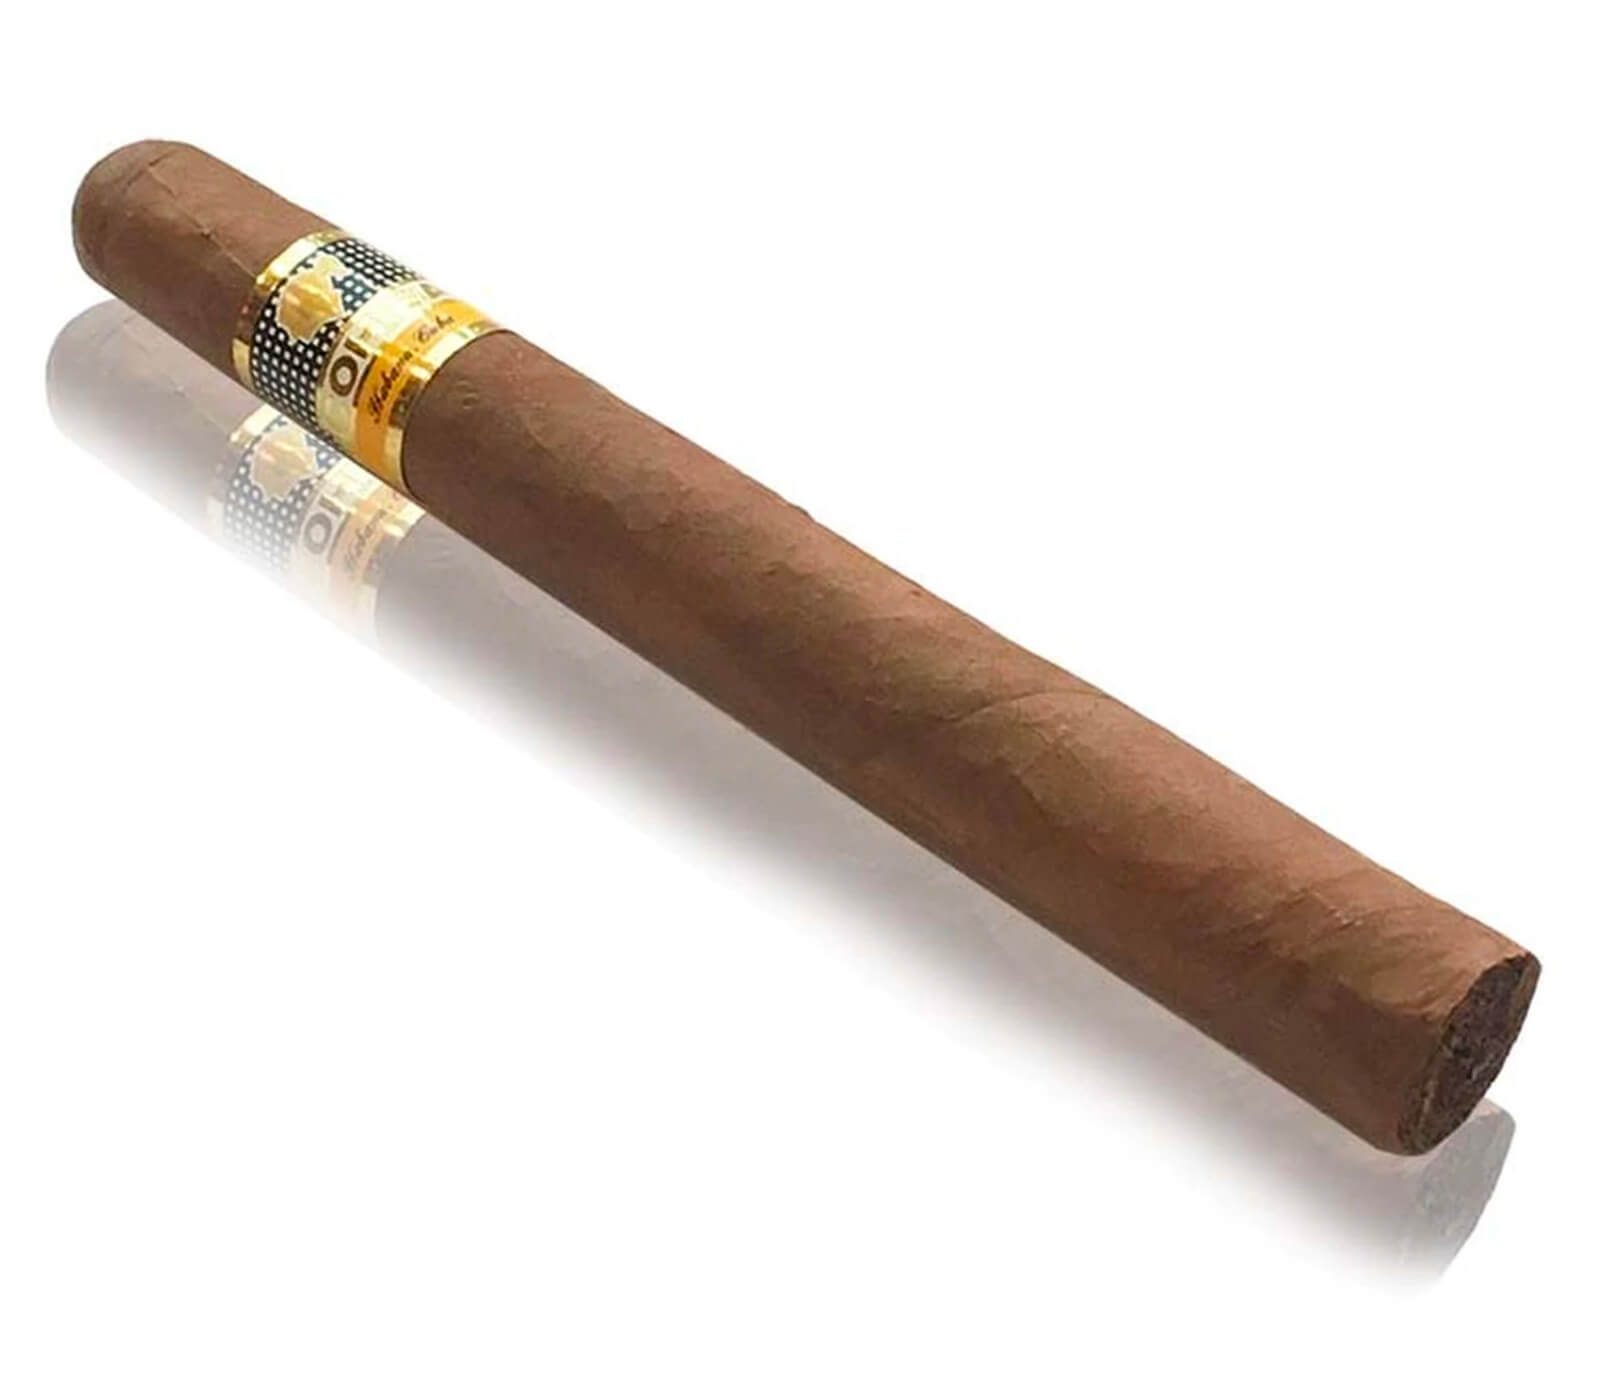 How to choose a Cuban cigar? All about cigars